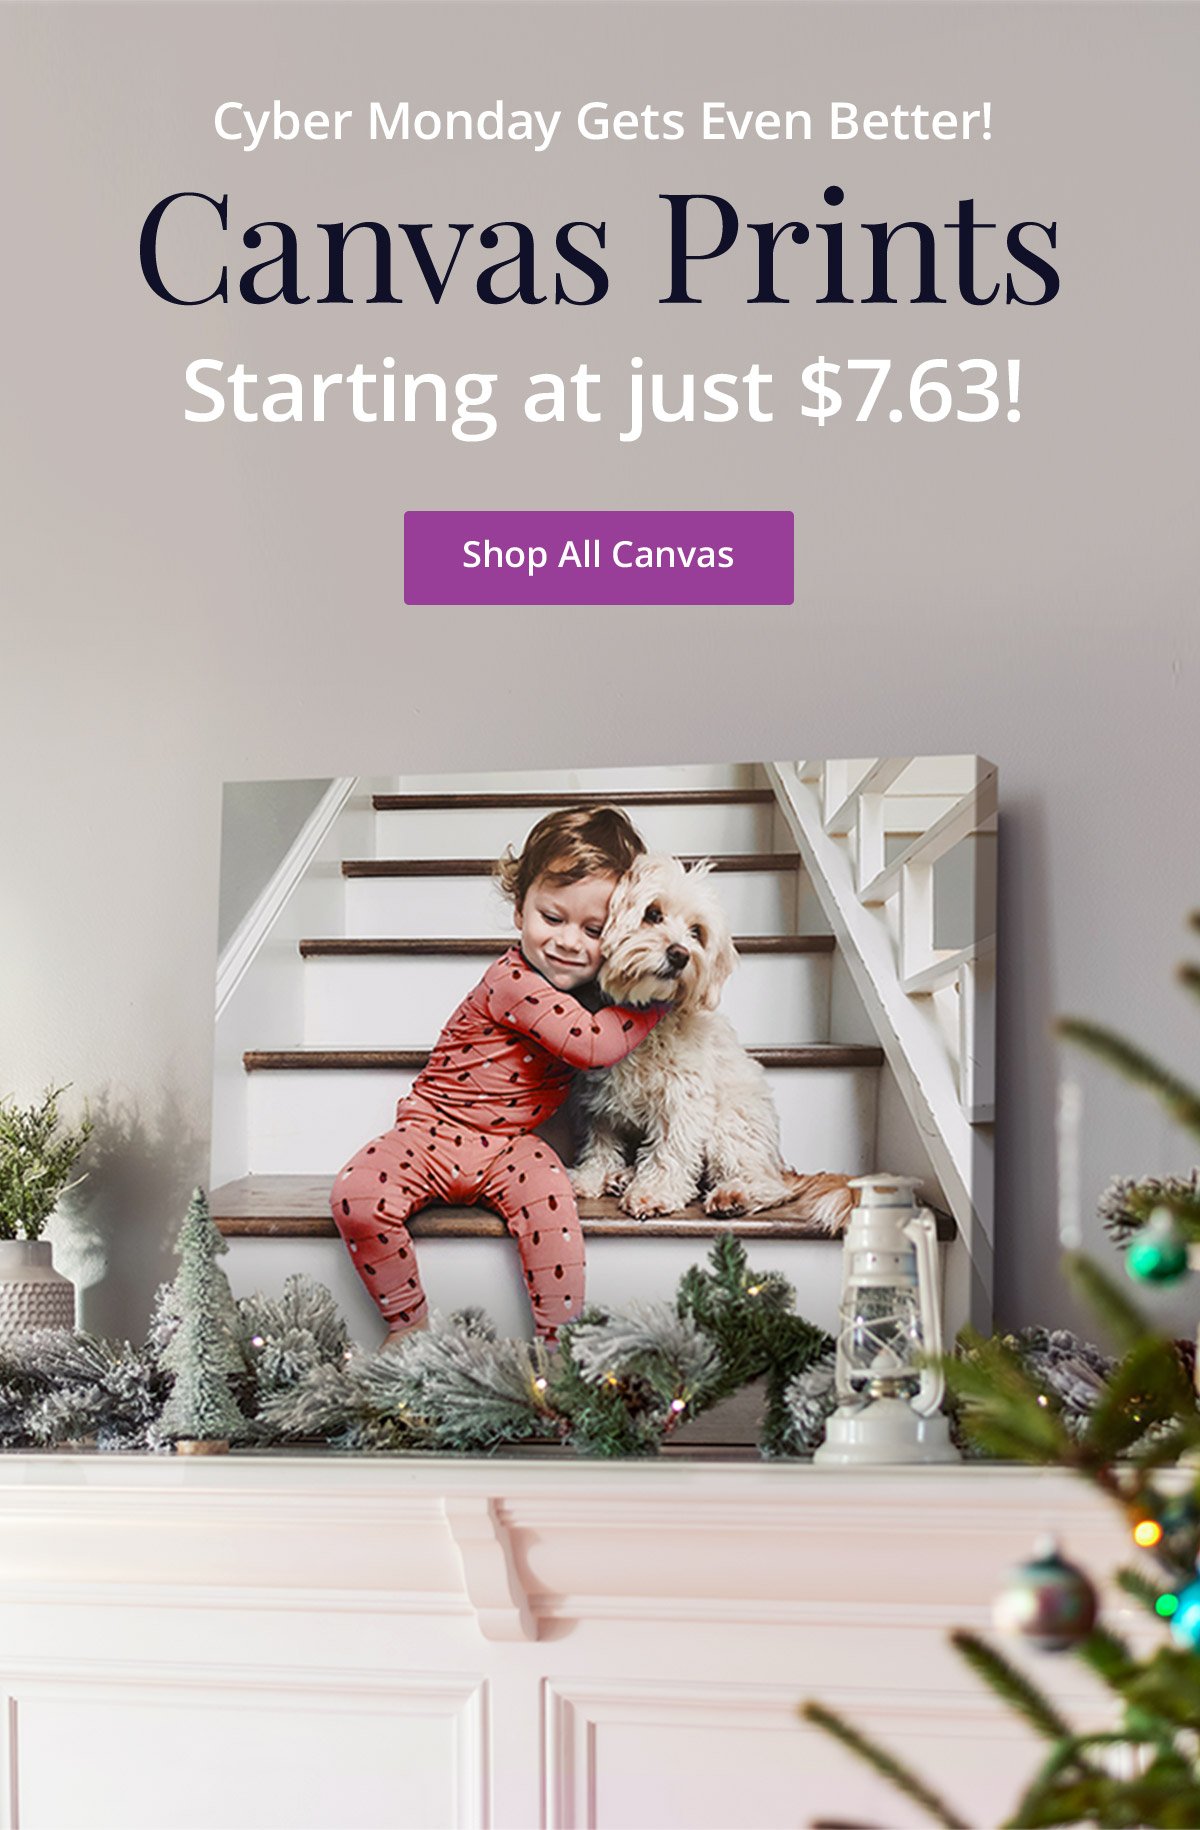 Cyber Monday Gets Even Better! Canvas Prints Starting at just $7.63! | Shop All Canvas